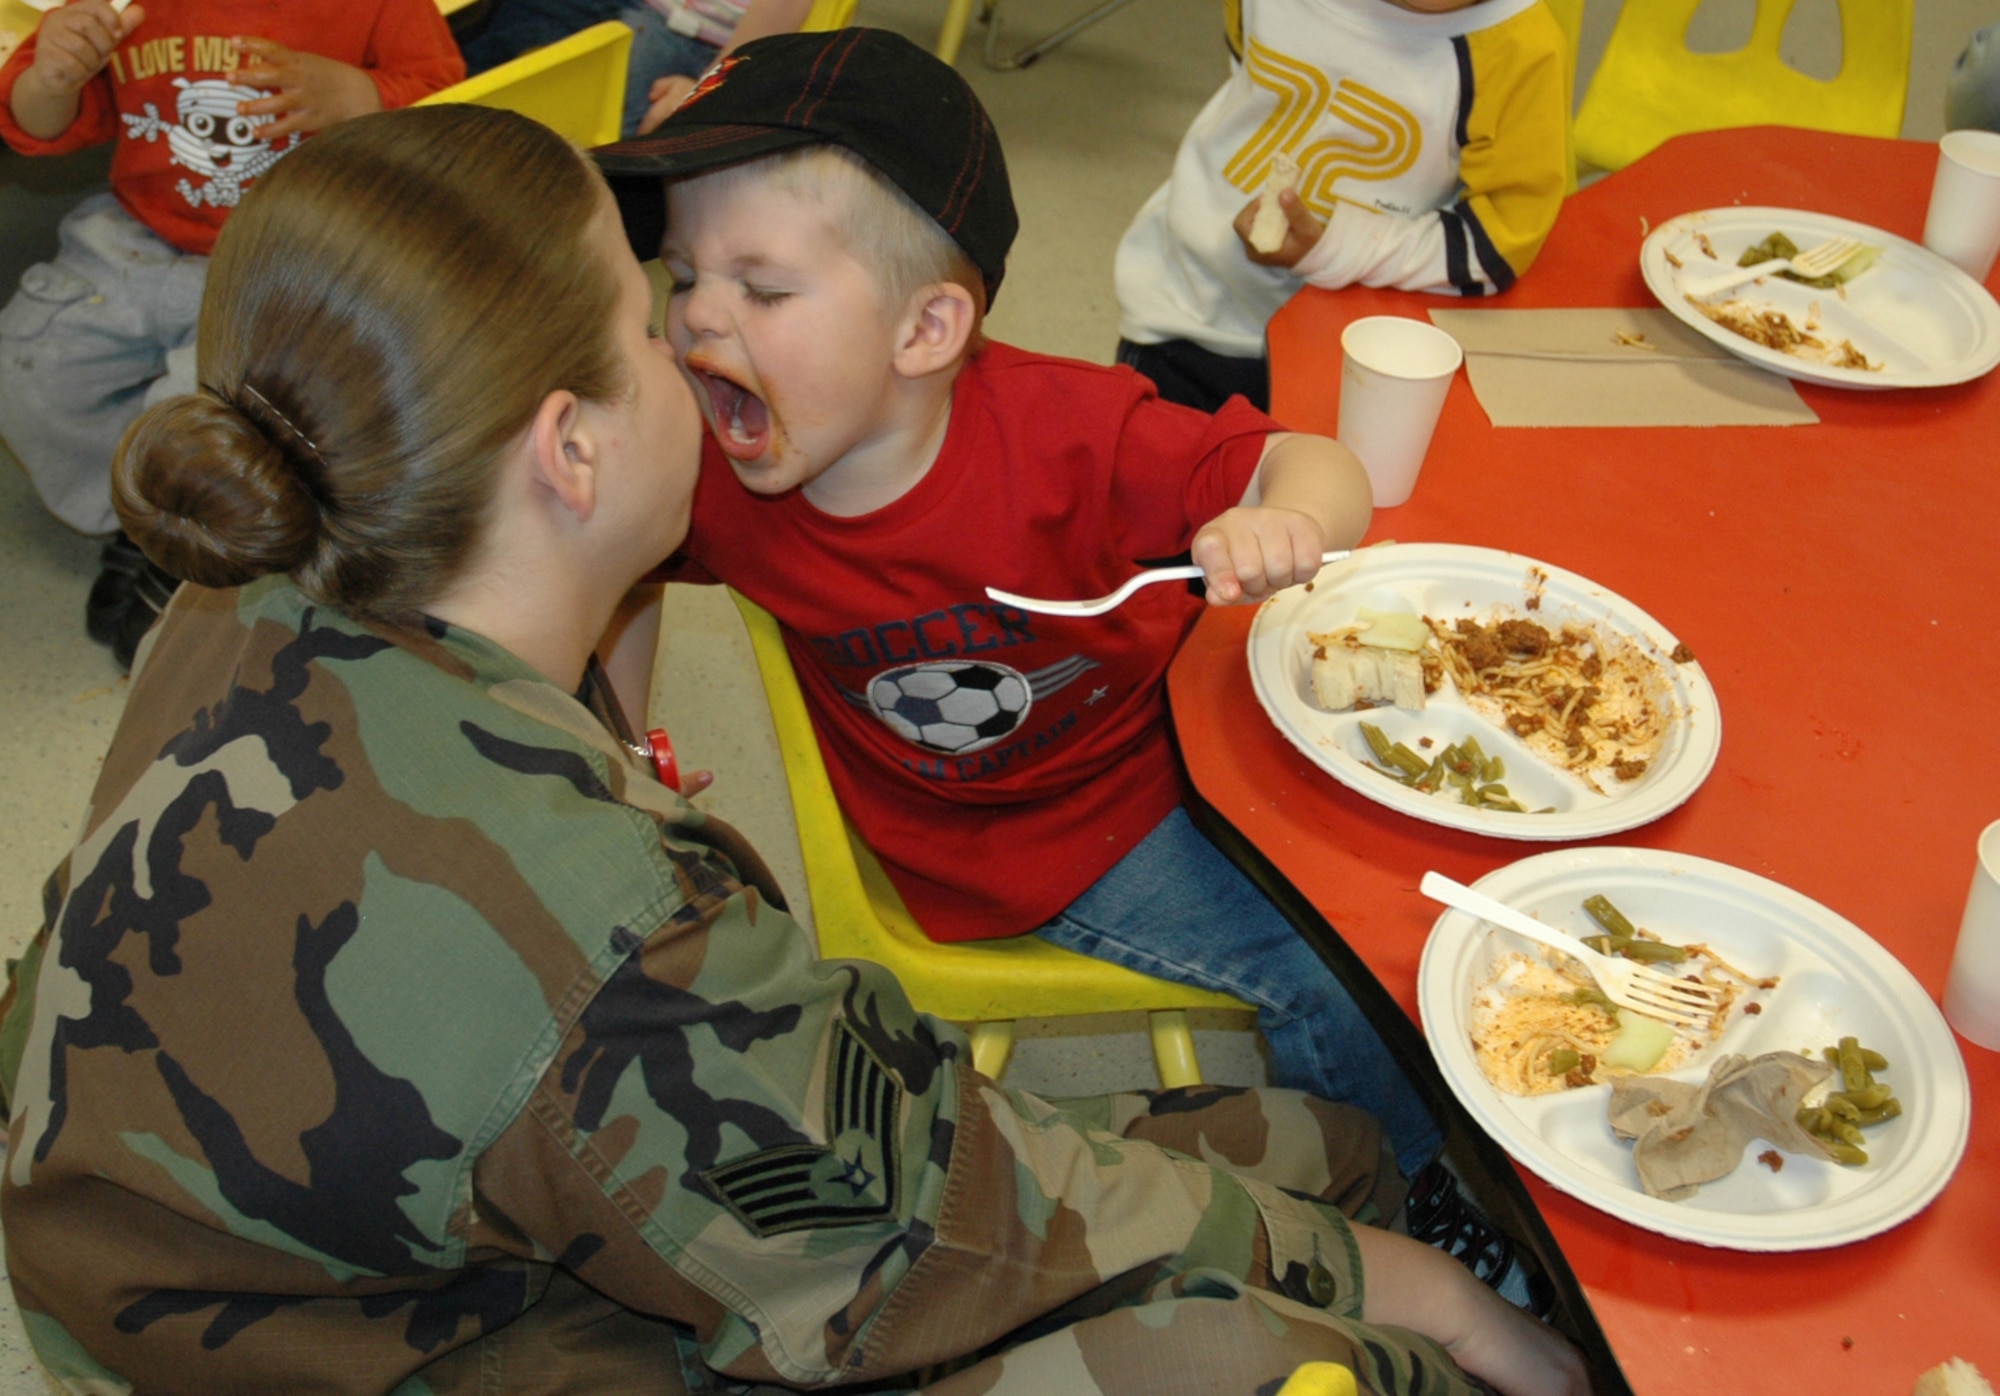 Staff Sgt. Dallas Swalla , 22nd  Medical Operations Squadron joins her son Conner, 3, at the Child Development Center April 11 for the Annual Month of the Military Child luncheon.  (Air Force photo by Tech. Sgt. Genevieve Morris 22nd ARW Public Affairs)